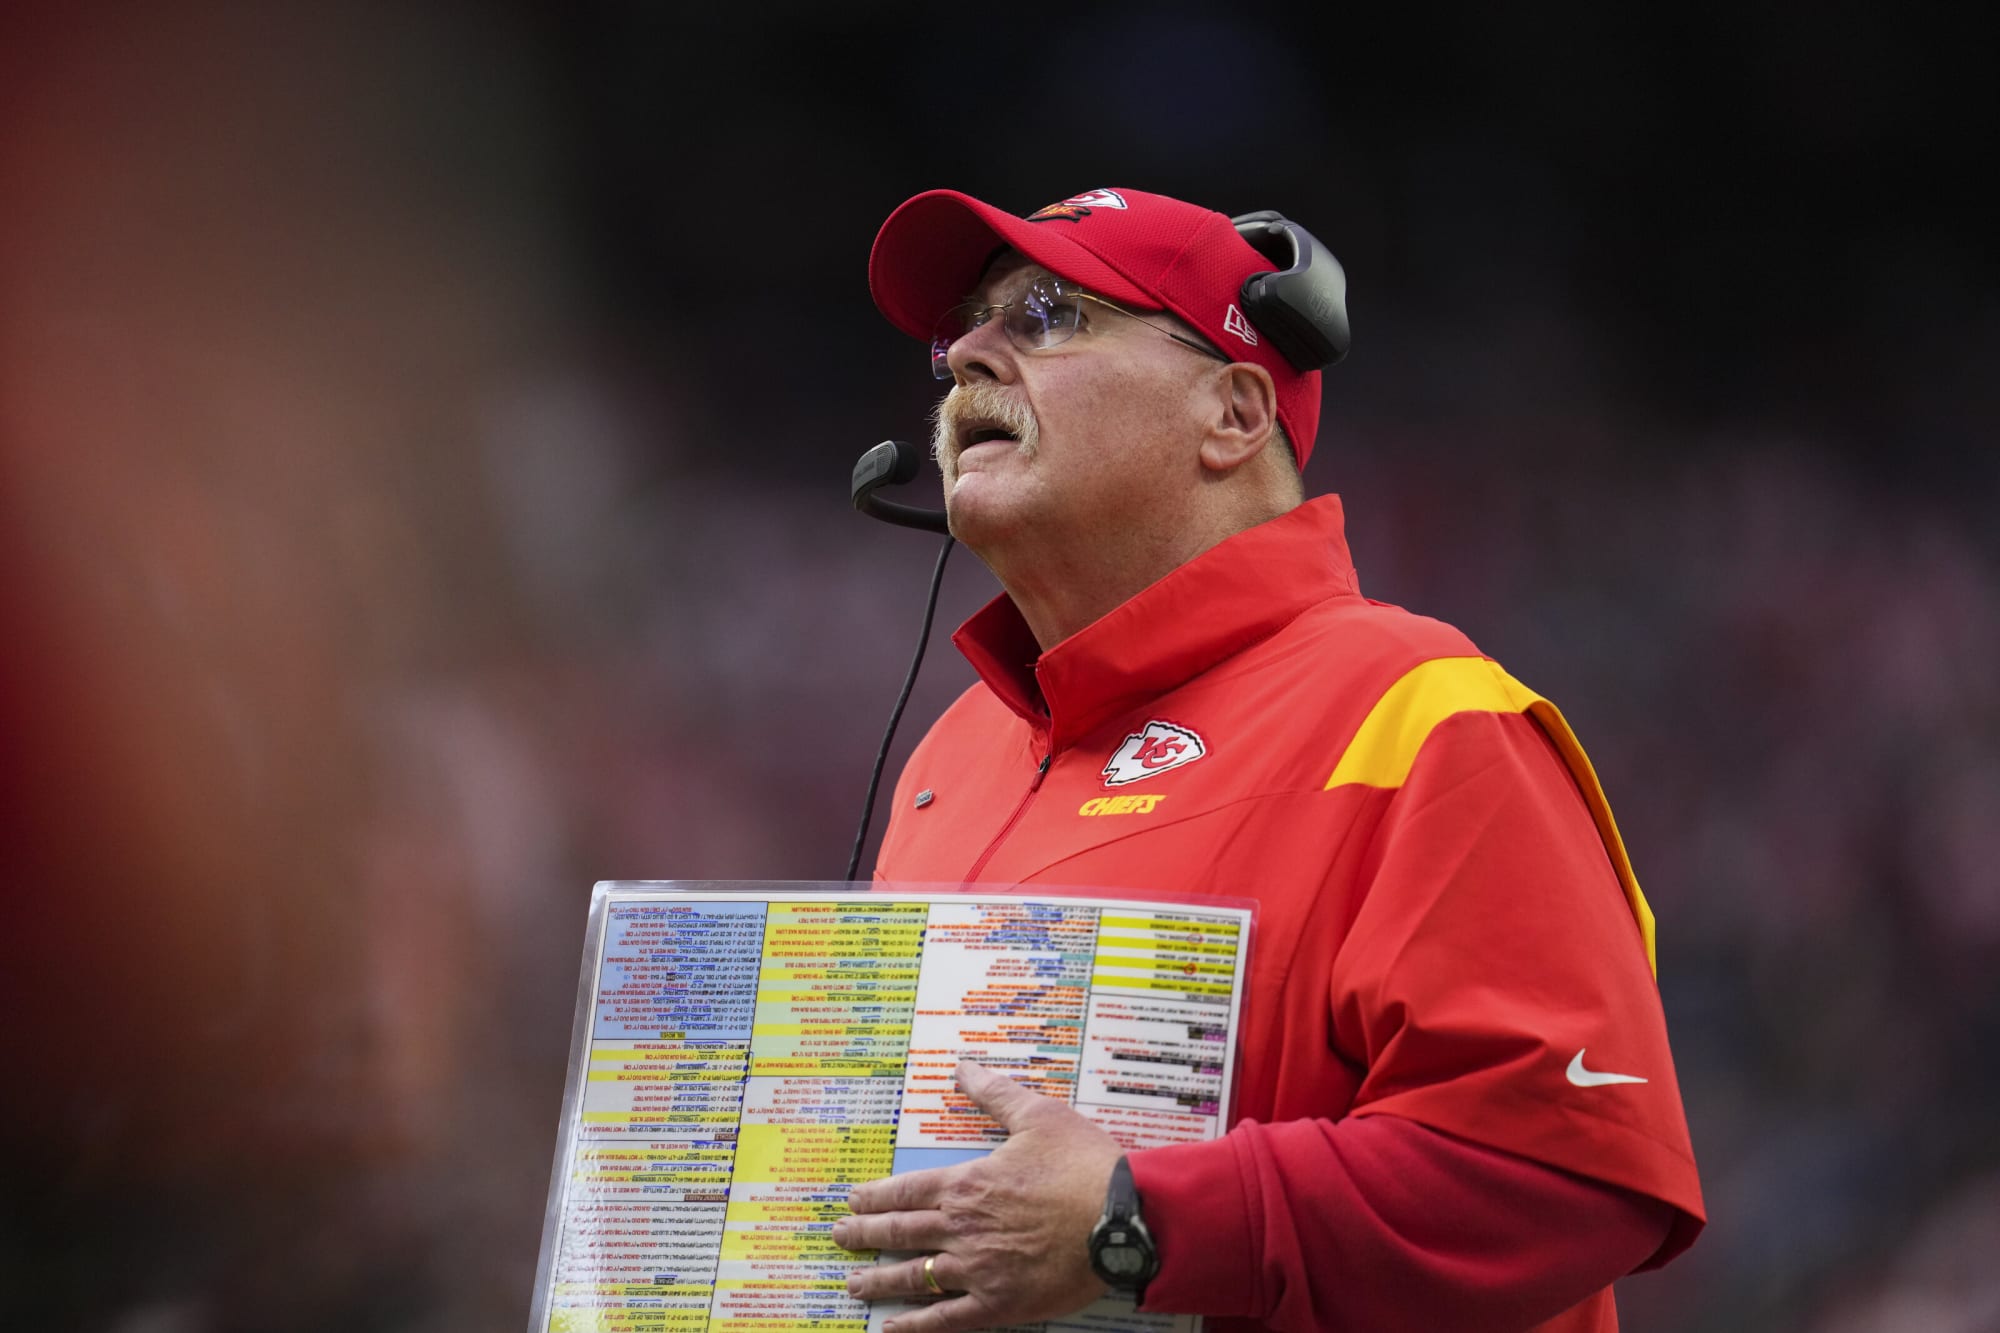 Skyy Moore or not, Chiefs fans have no problem identifying a major weakness